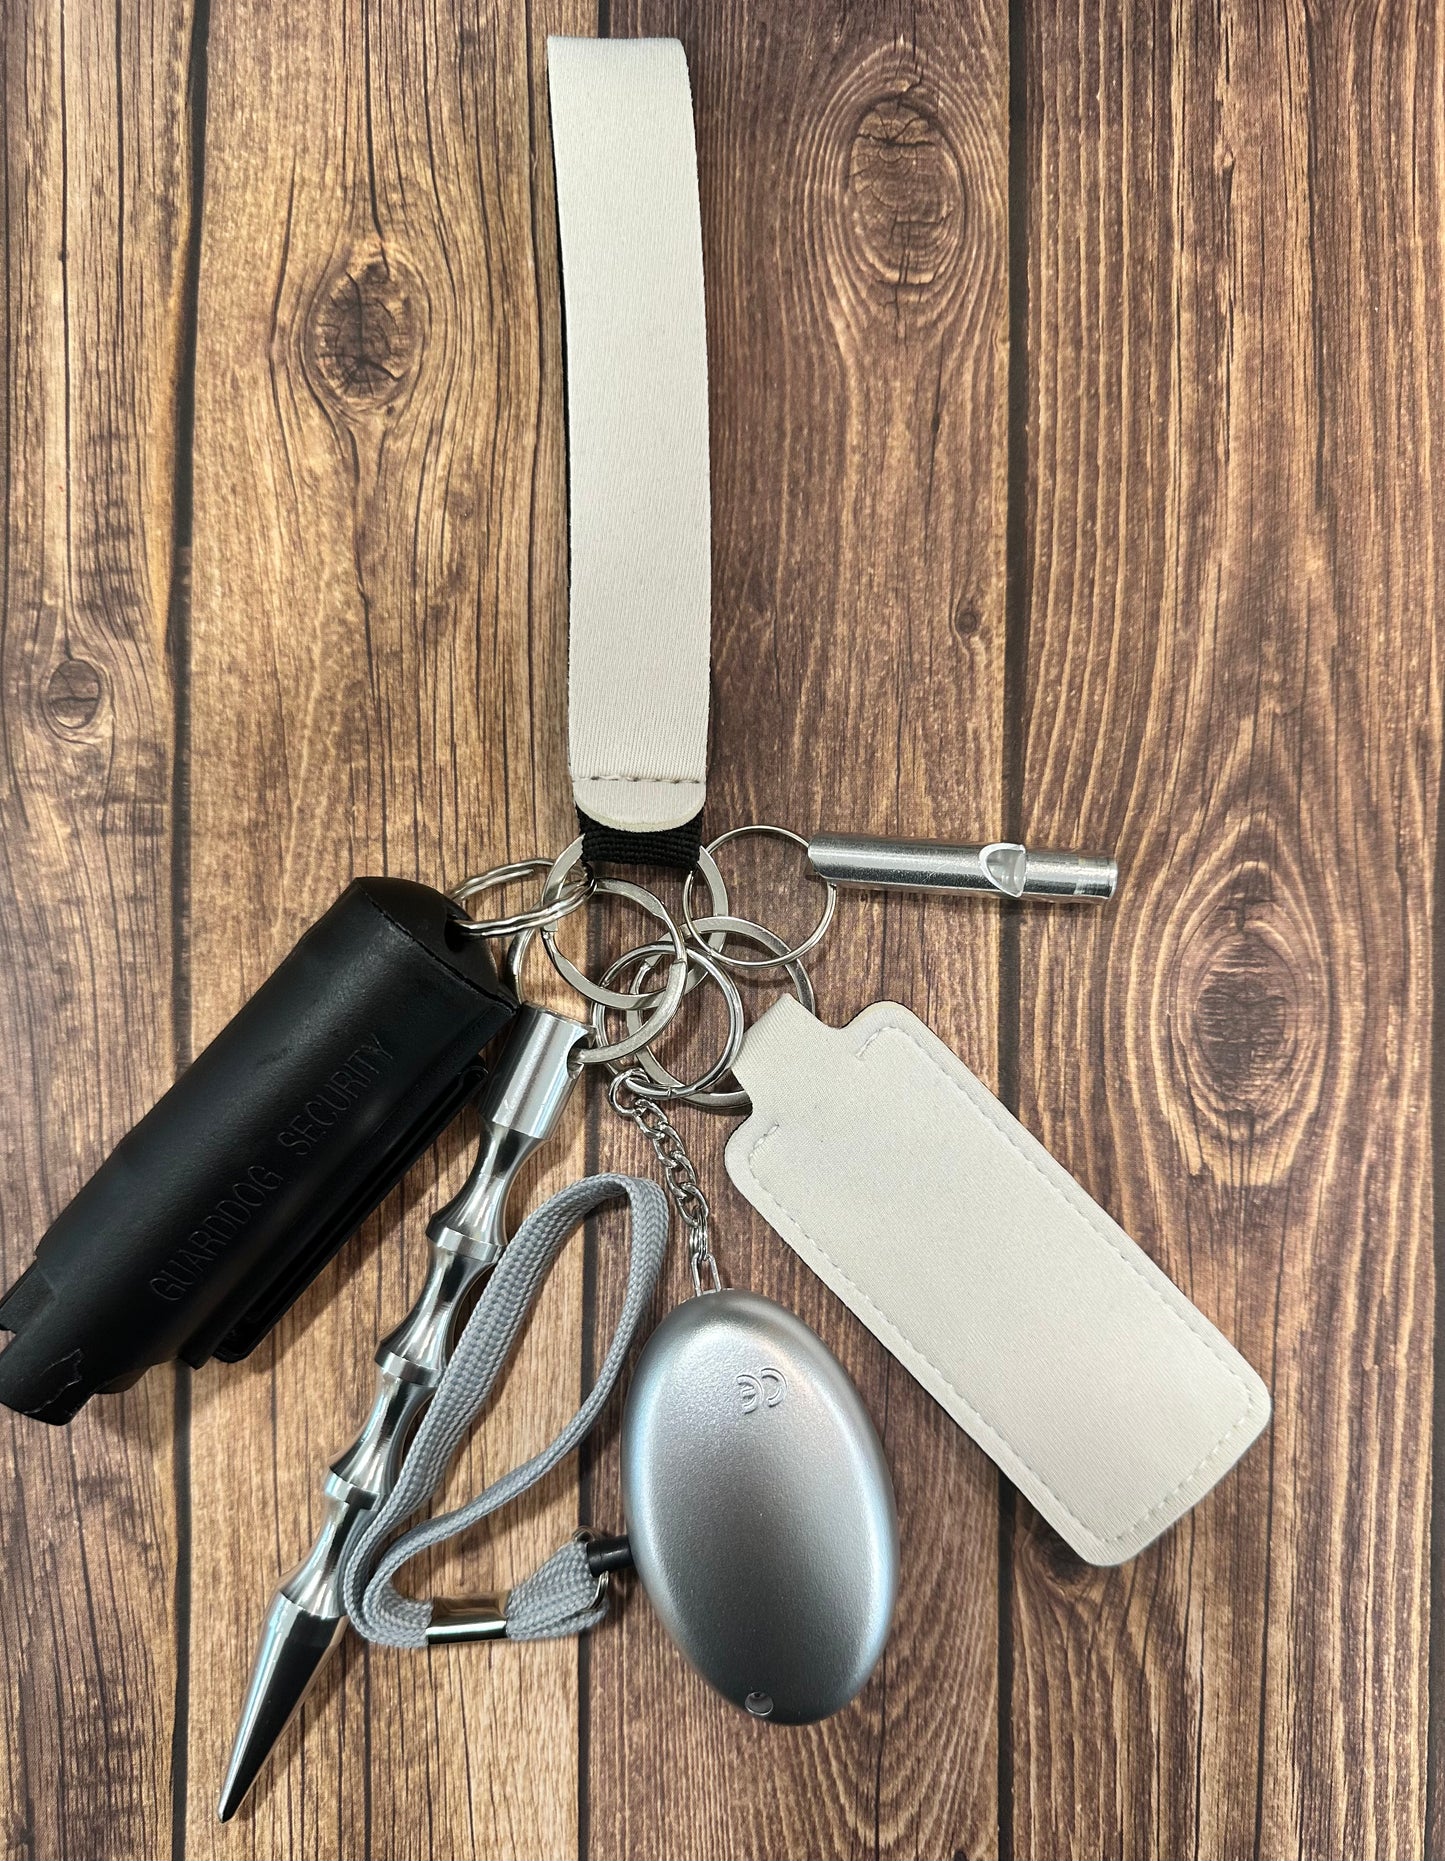 Fully loaded safety keychain